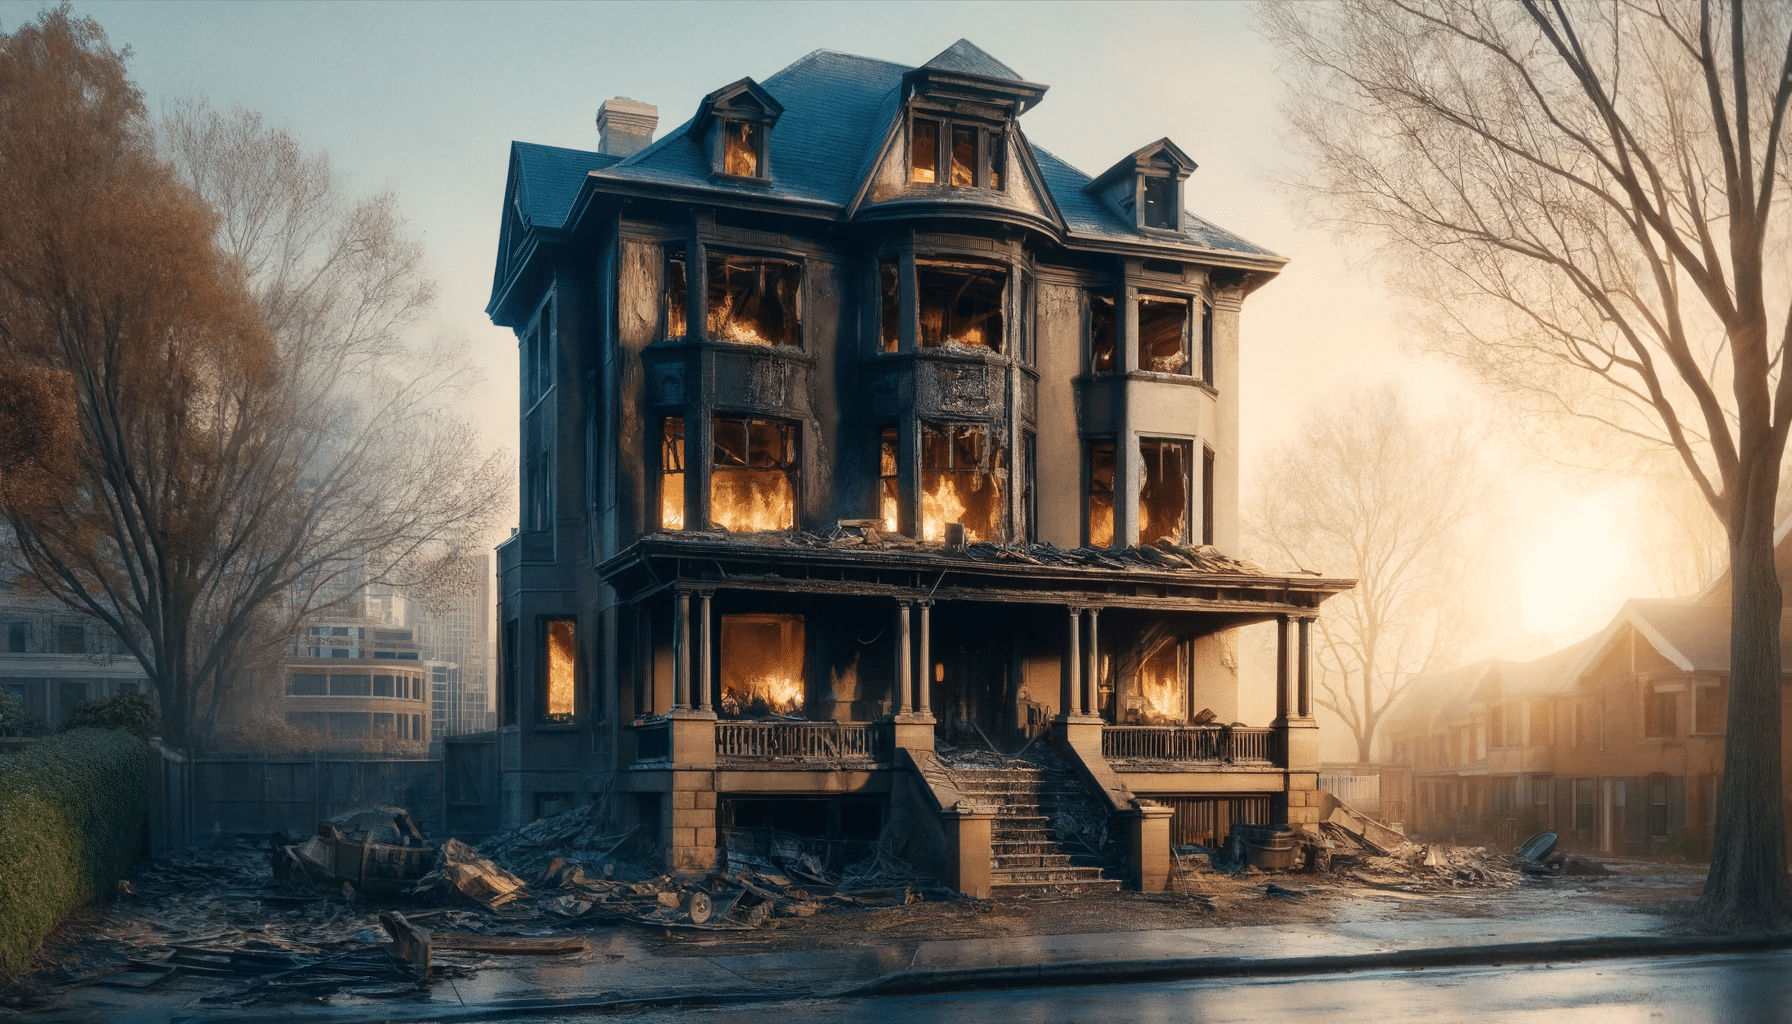 Importance of Disclosure When Selling a House with Fire Damage